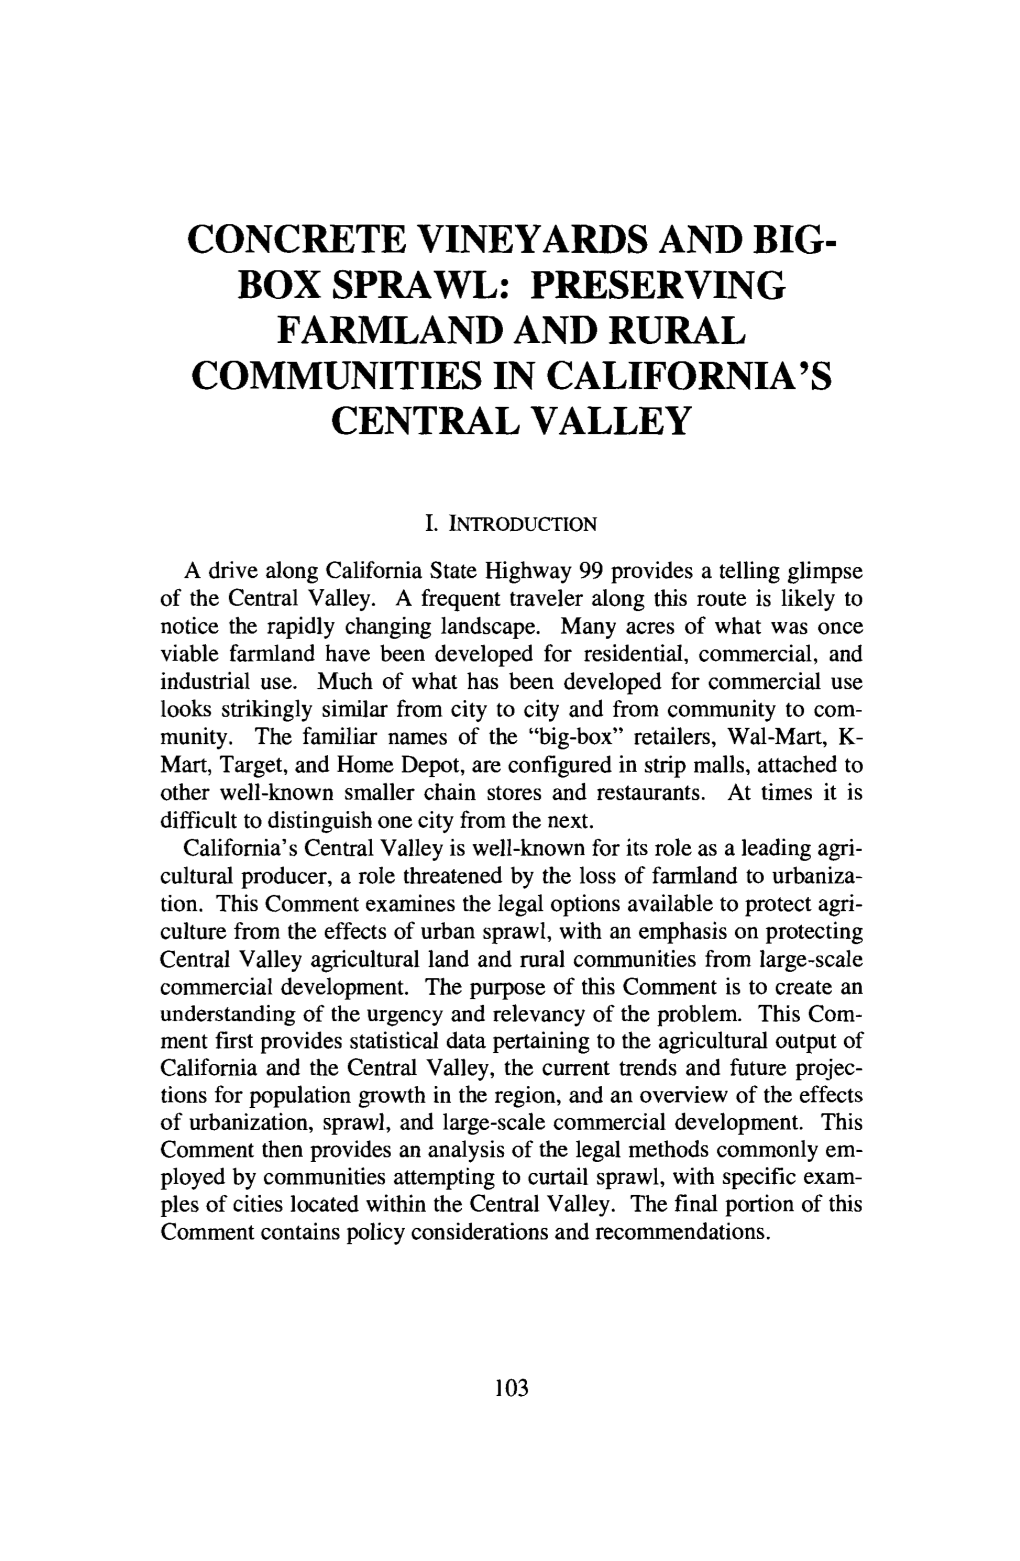 Preserving Farmland and Rural Communities in California's Central Valley